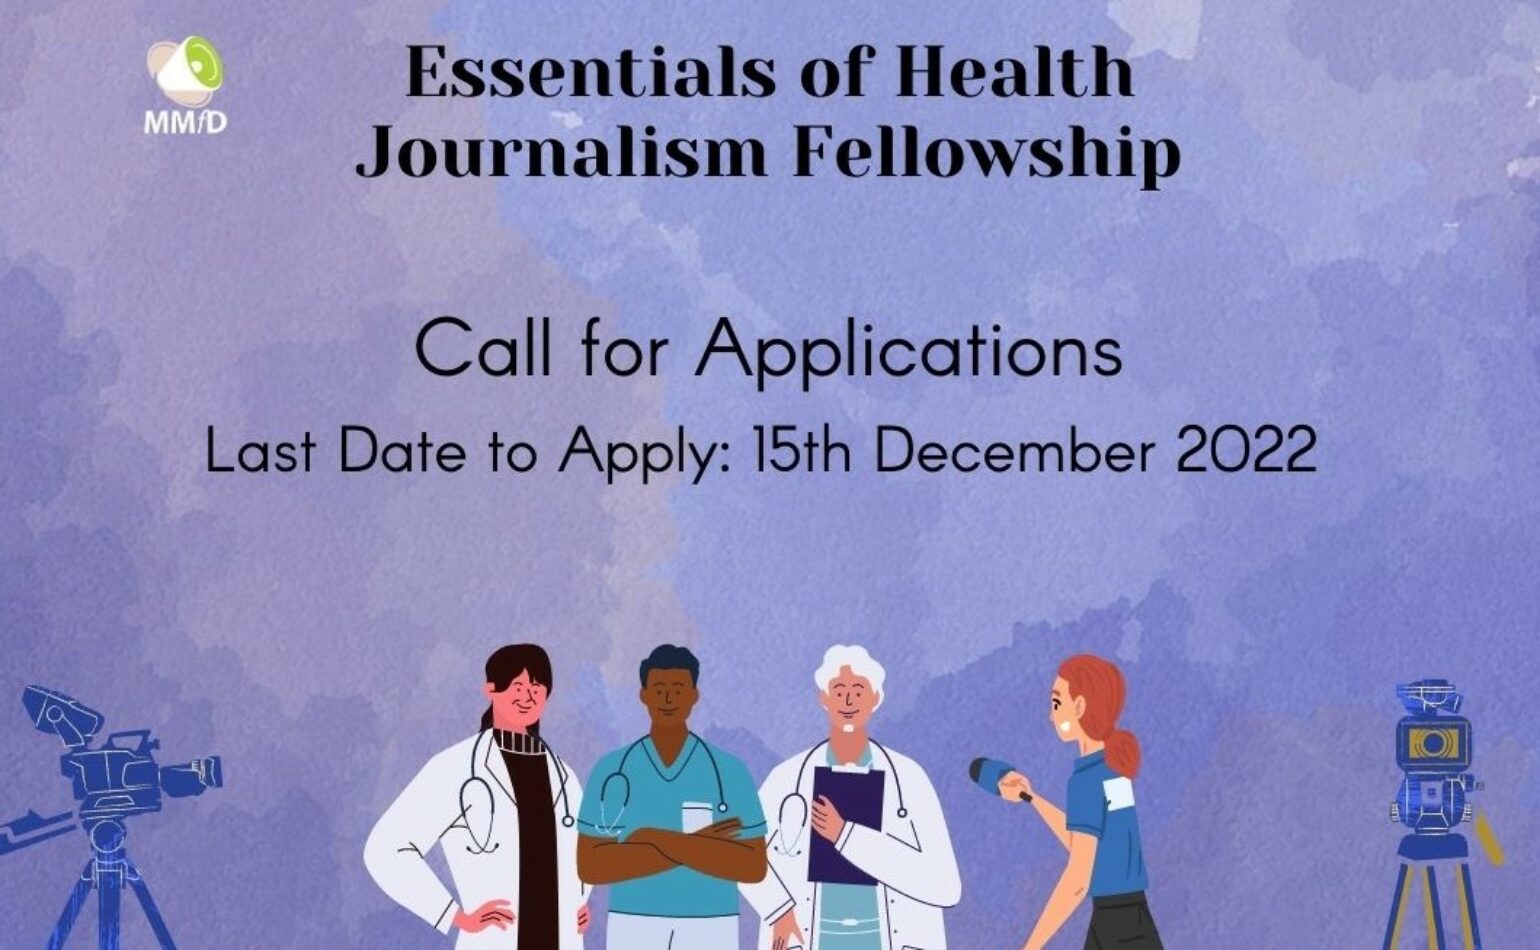 Media Matters for Democracy announces fellowship for health journalists 